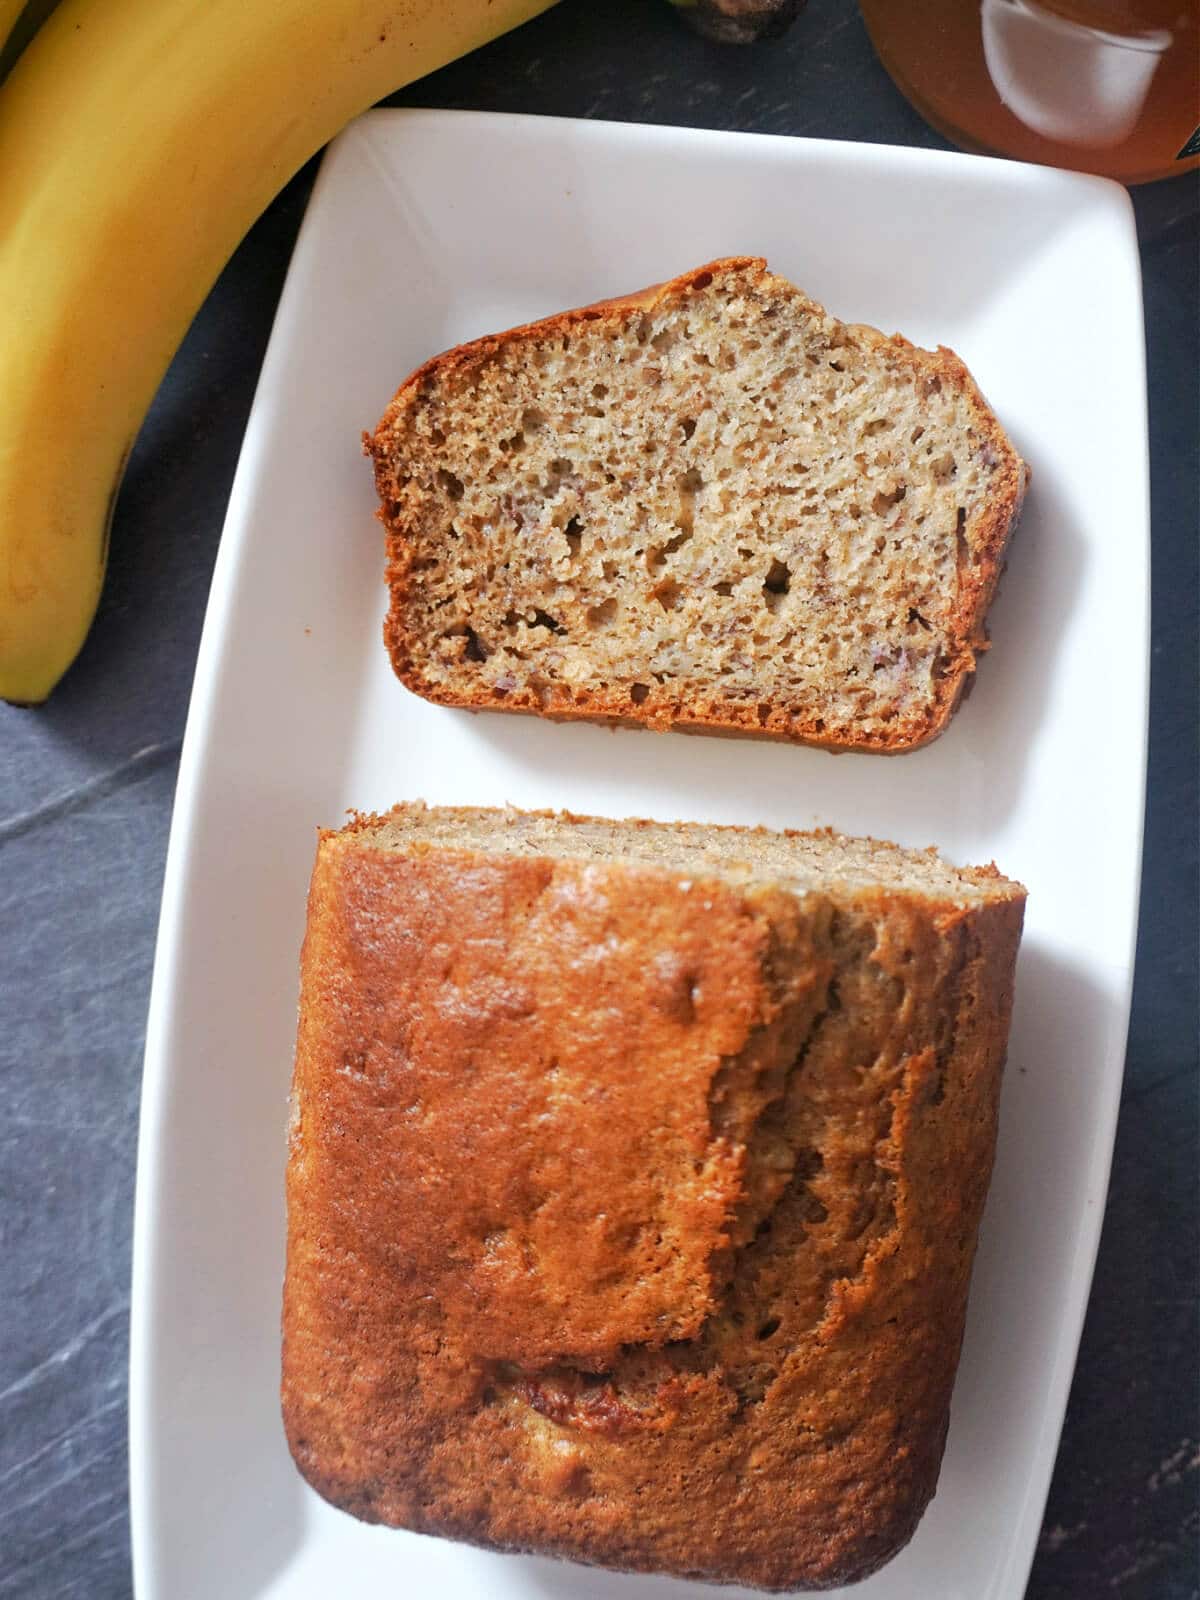 Overhead shot of a white rectangle plate with a slice of banana bread and the rest of the bread.